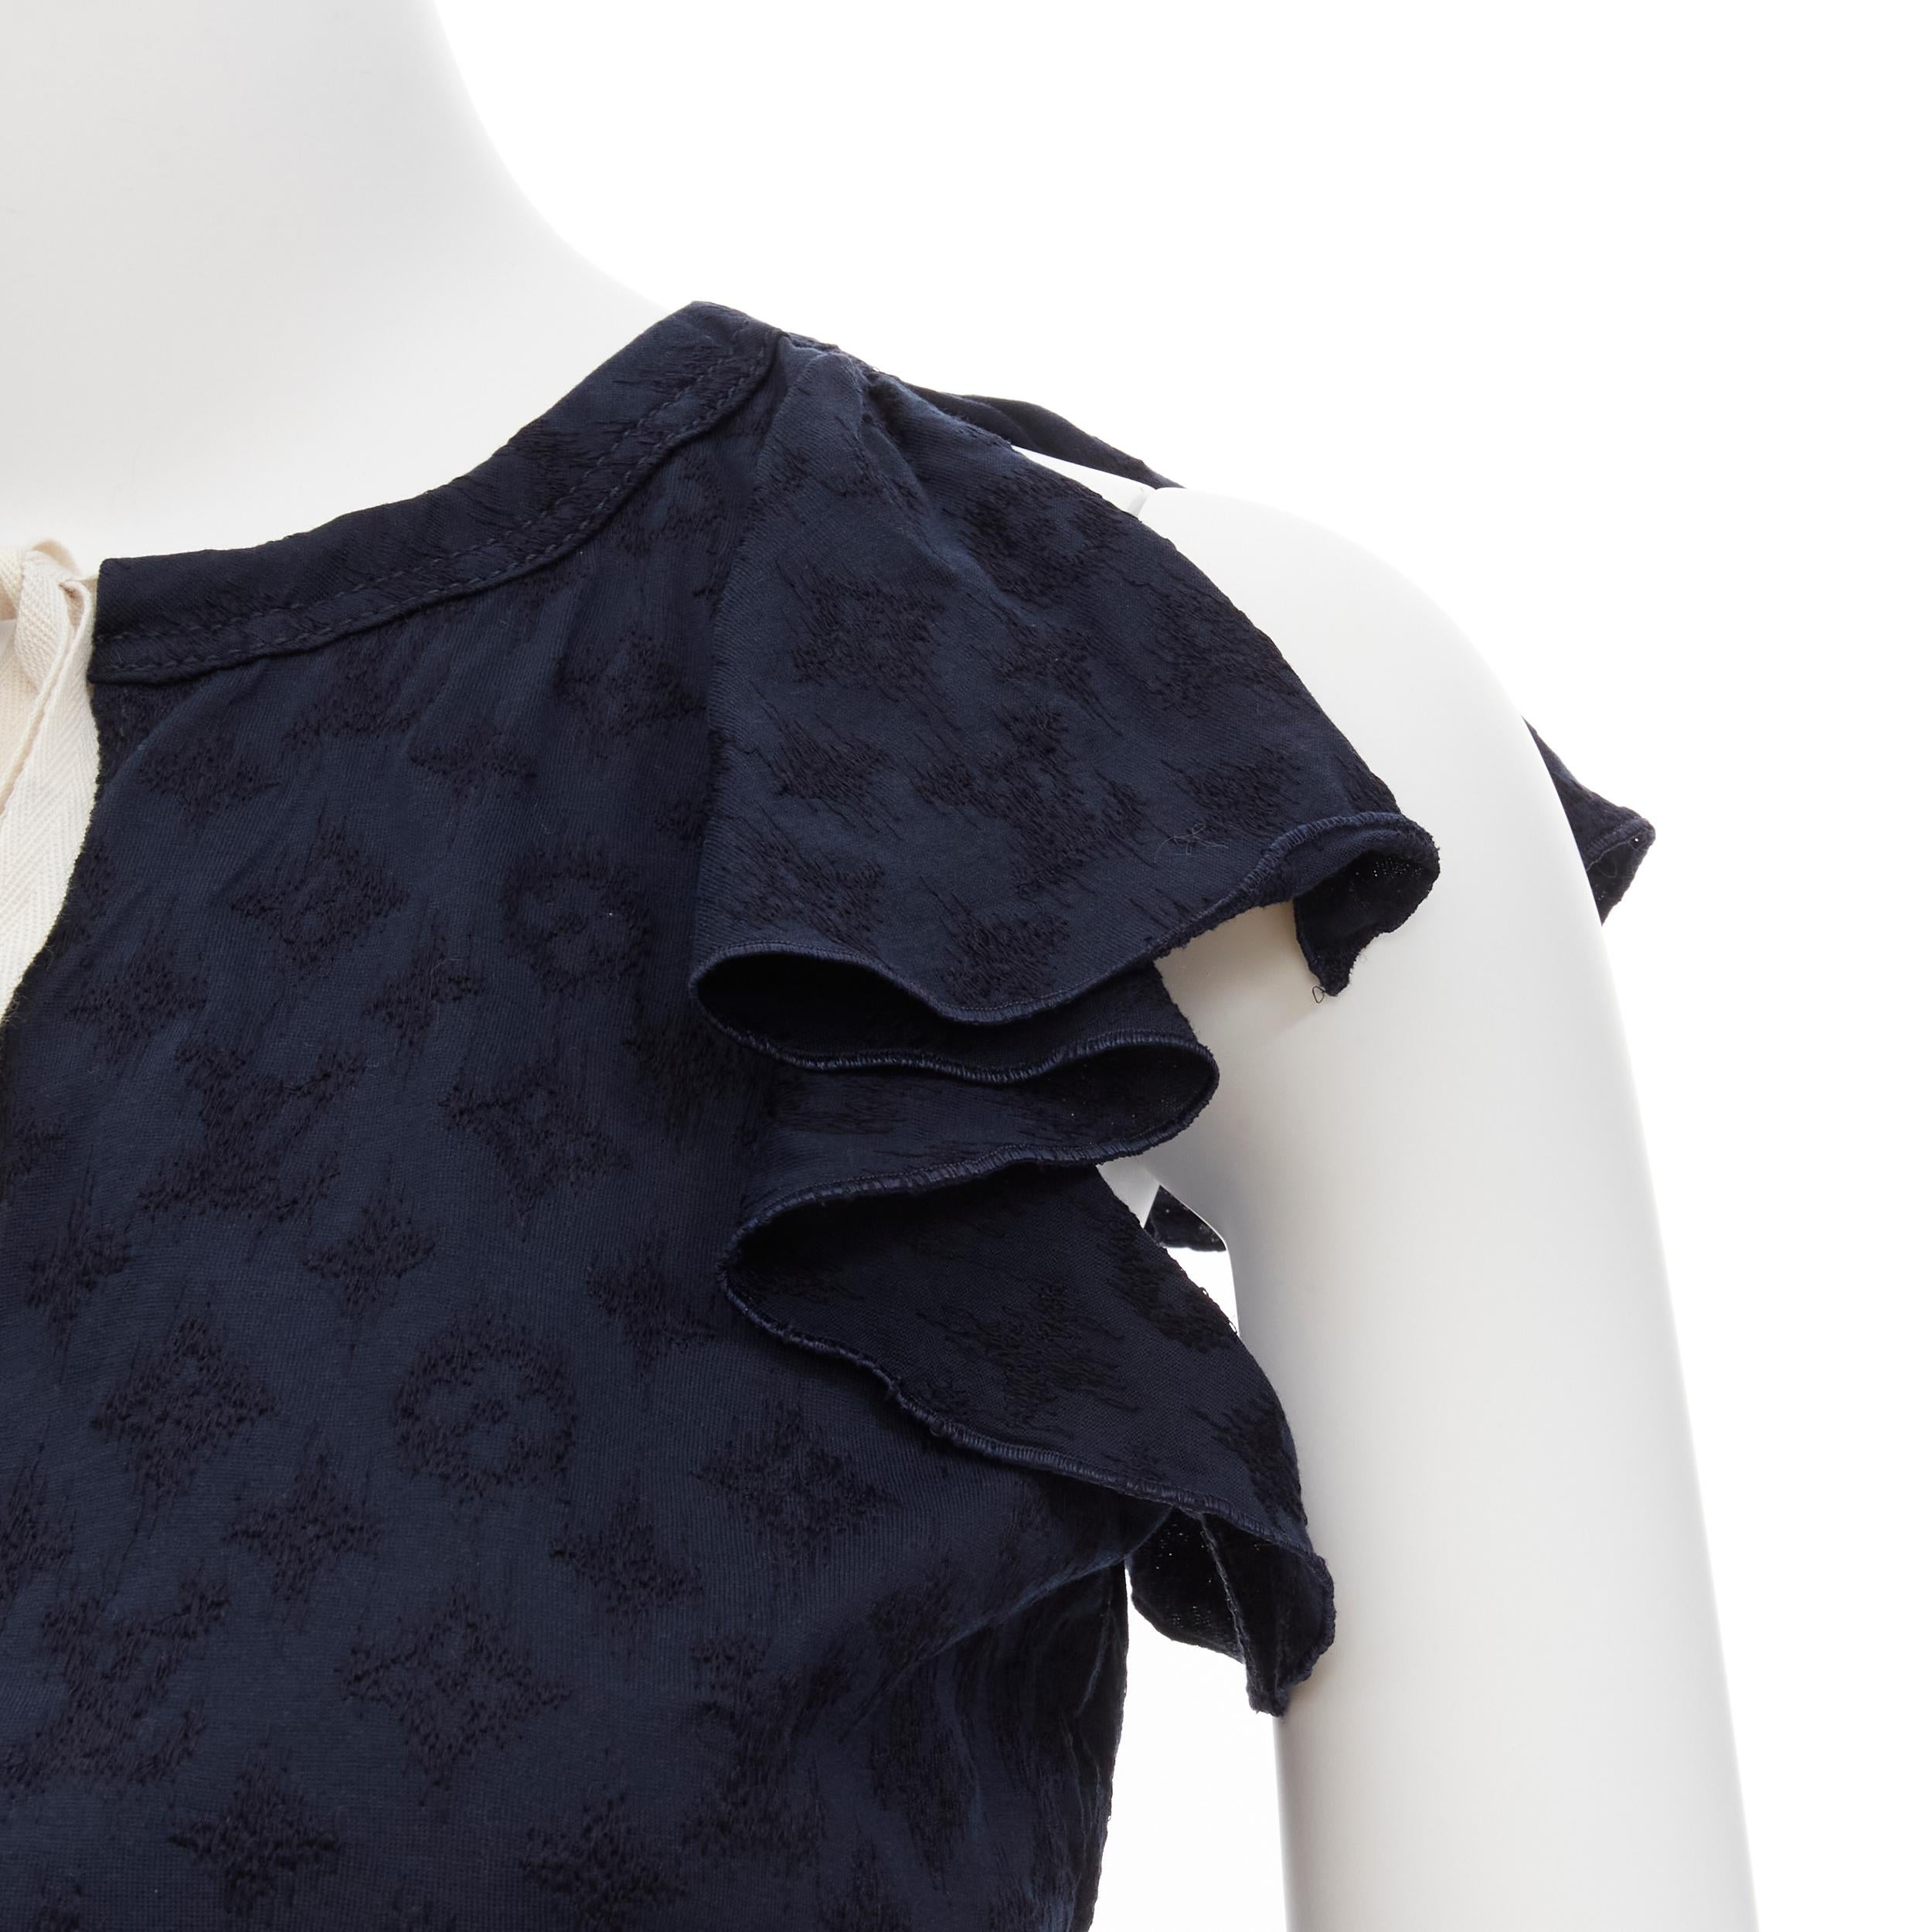 LOUIS VUITTON Marc Jacobs navy LV monogram ruffle sleeves peplum top S
Reference: TGAS/D00311
Brand: Louis Vuitton
Designer: Marc Jacobs
Material: Cotton
Color: Navy
Pattern: Monogram
Closure: Drawstring
Extra Details: Peplum design accentuates the